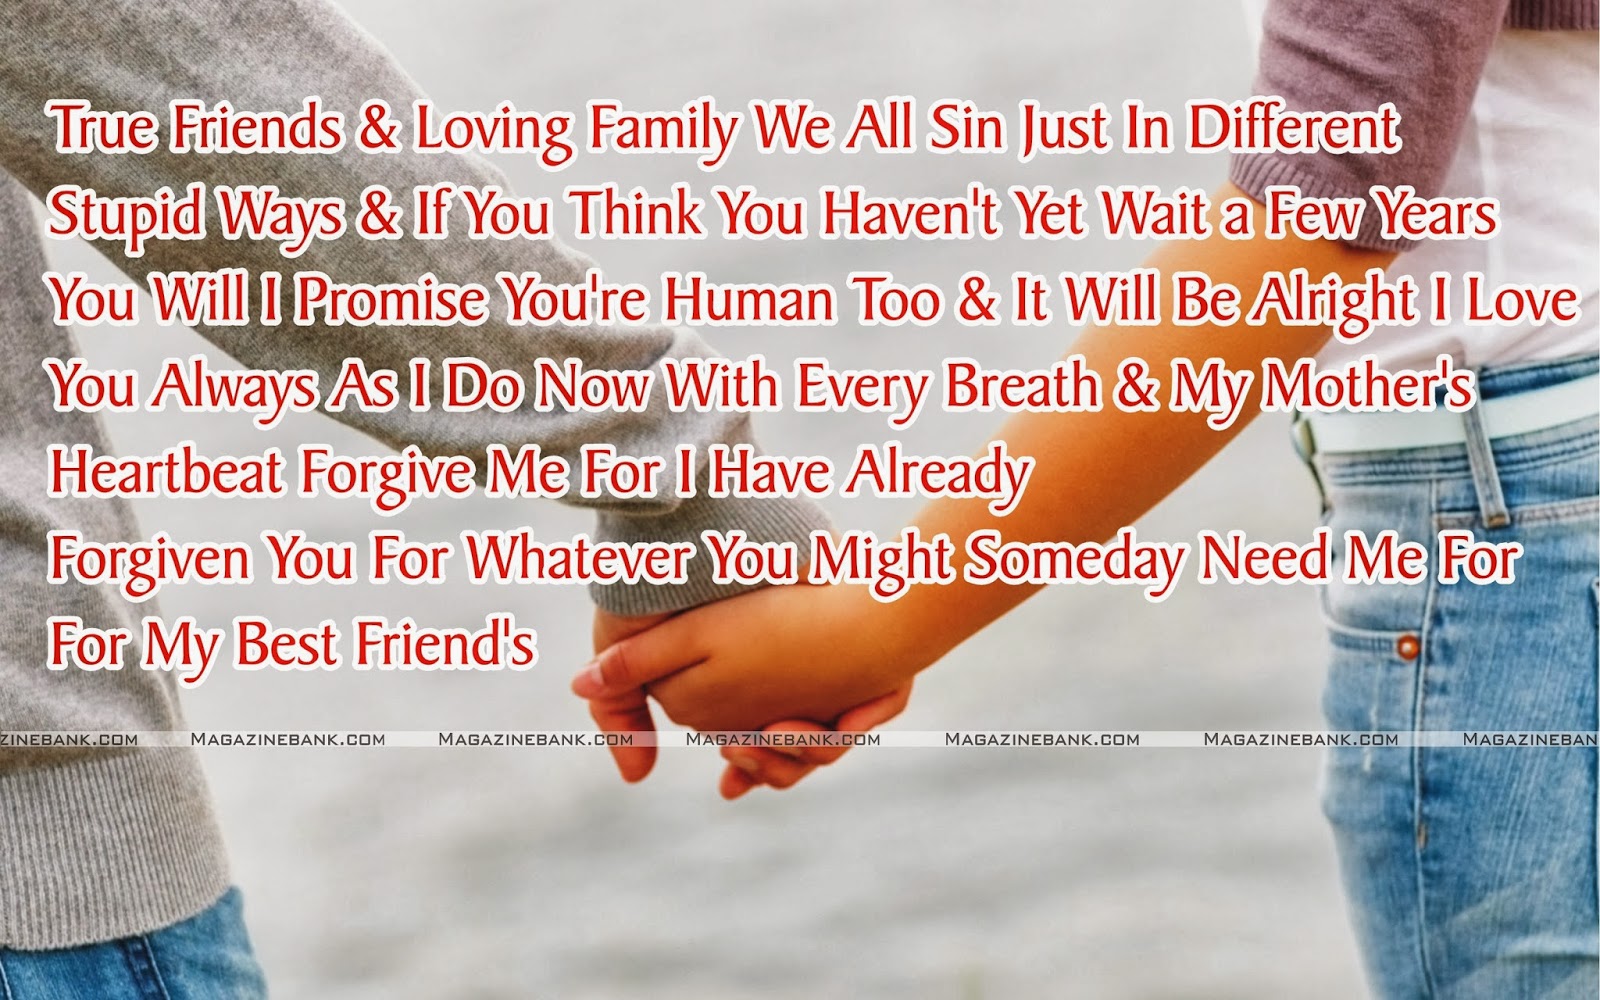 Friendship Quotes For Albums Happy friendship day quotes on